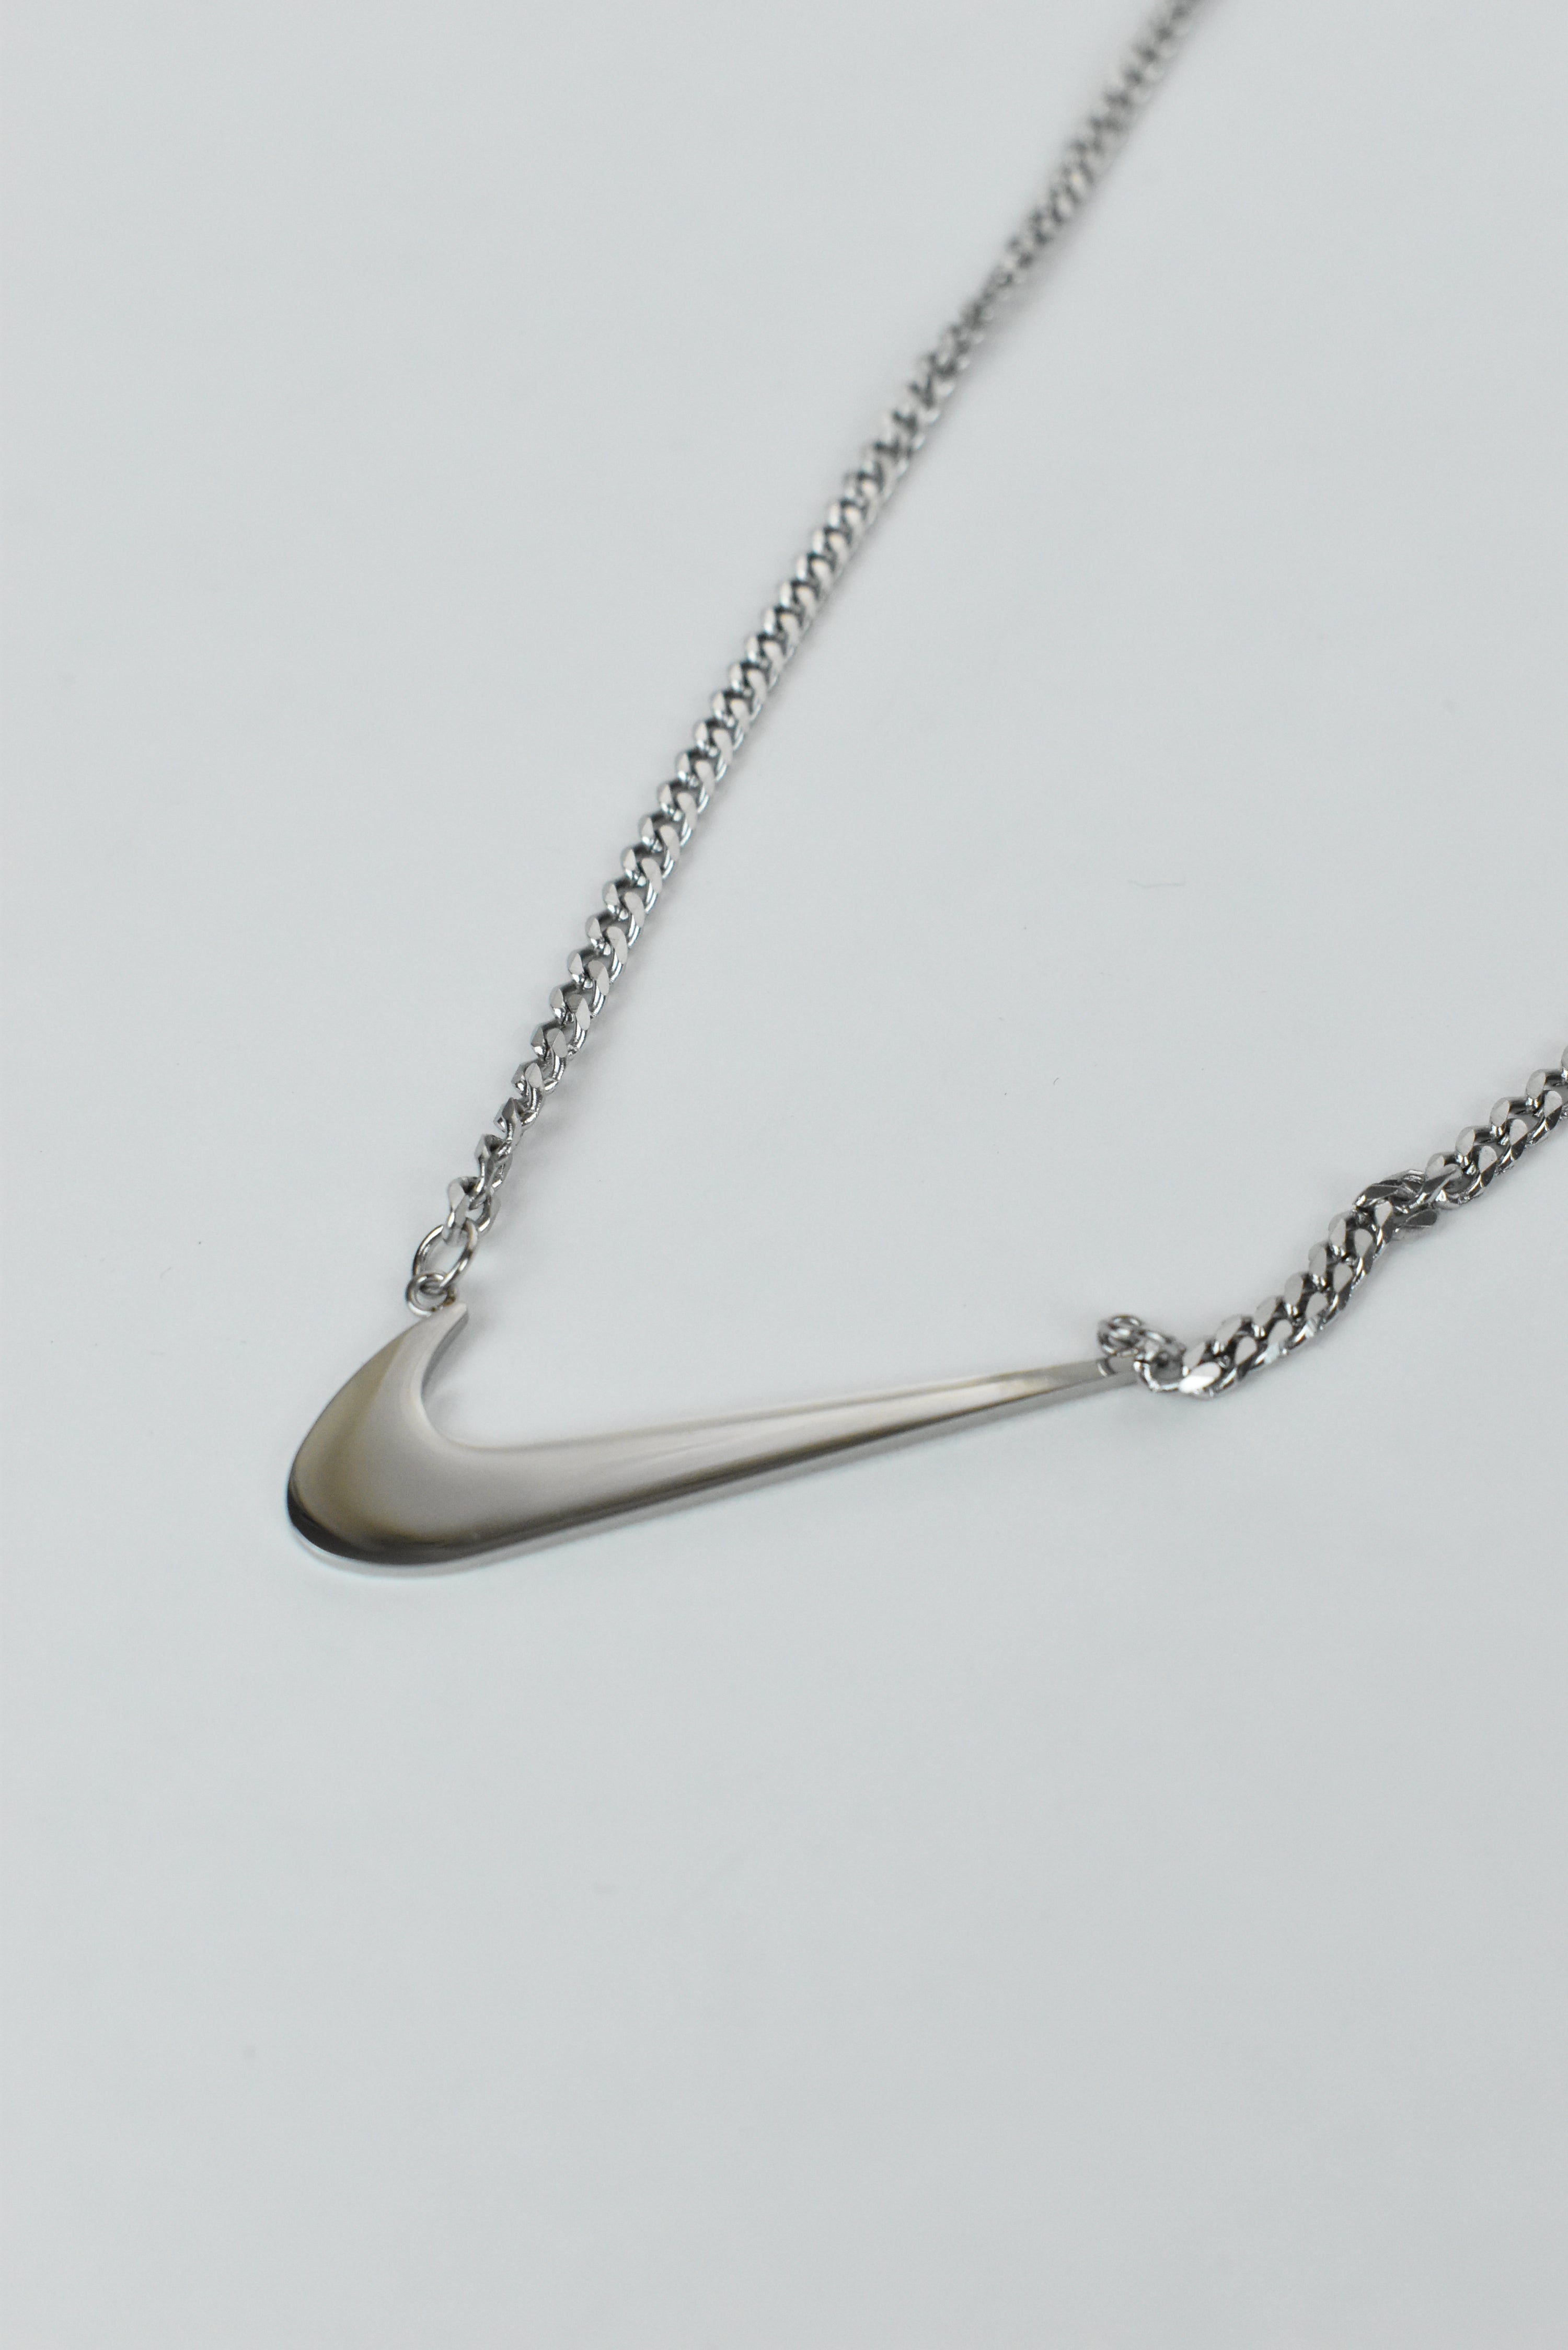 New Nike Swoosh Pendent Necklace Silver Bootleg